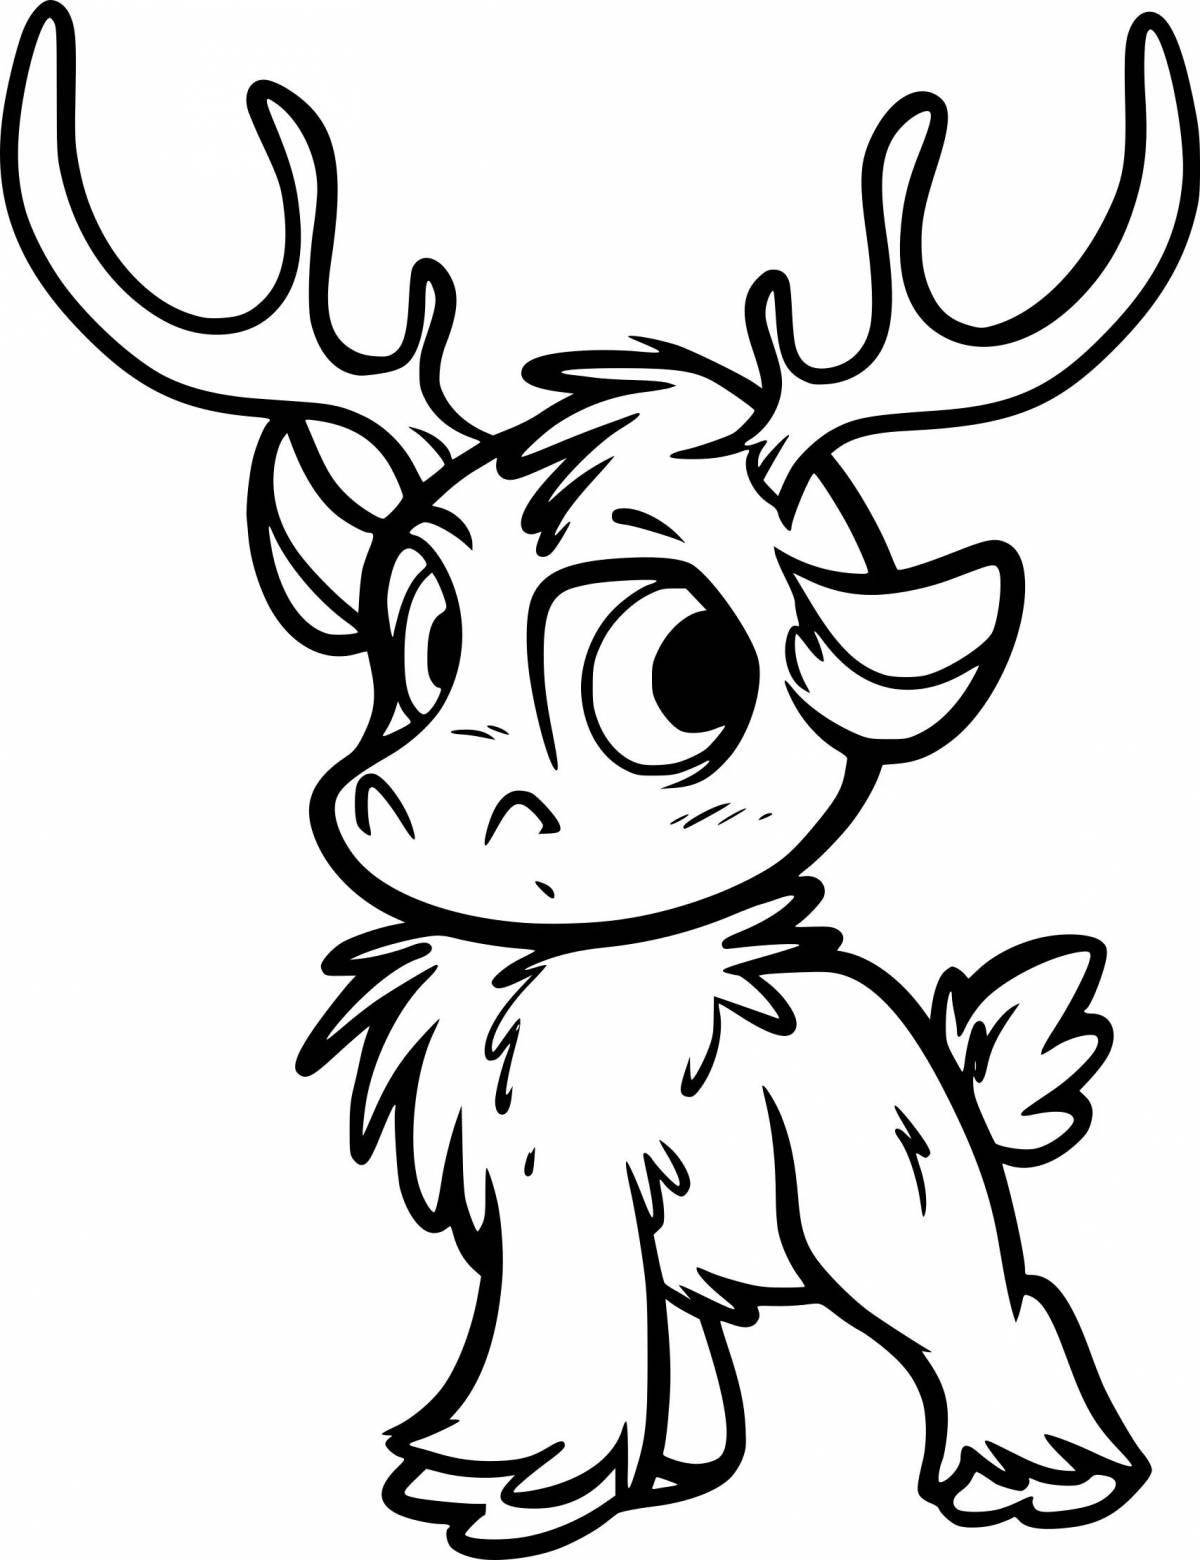 Sven glowing coloring page